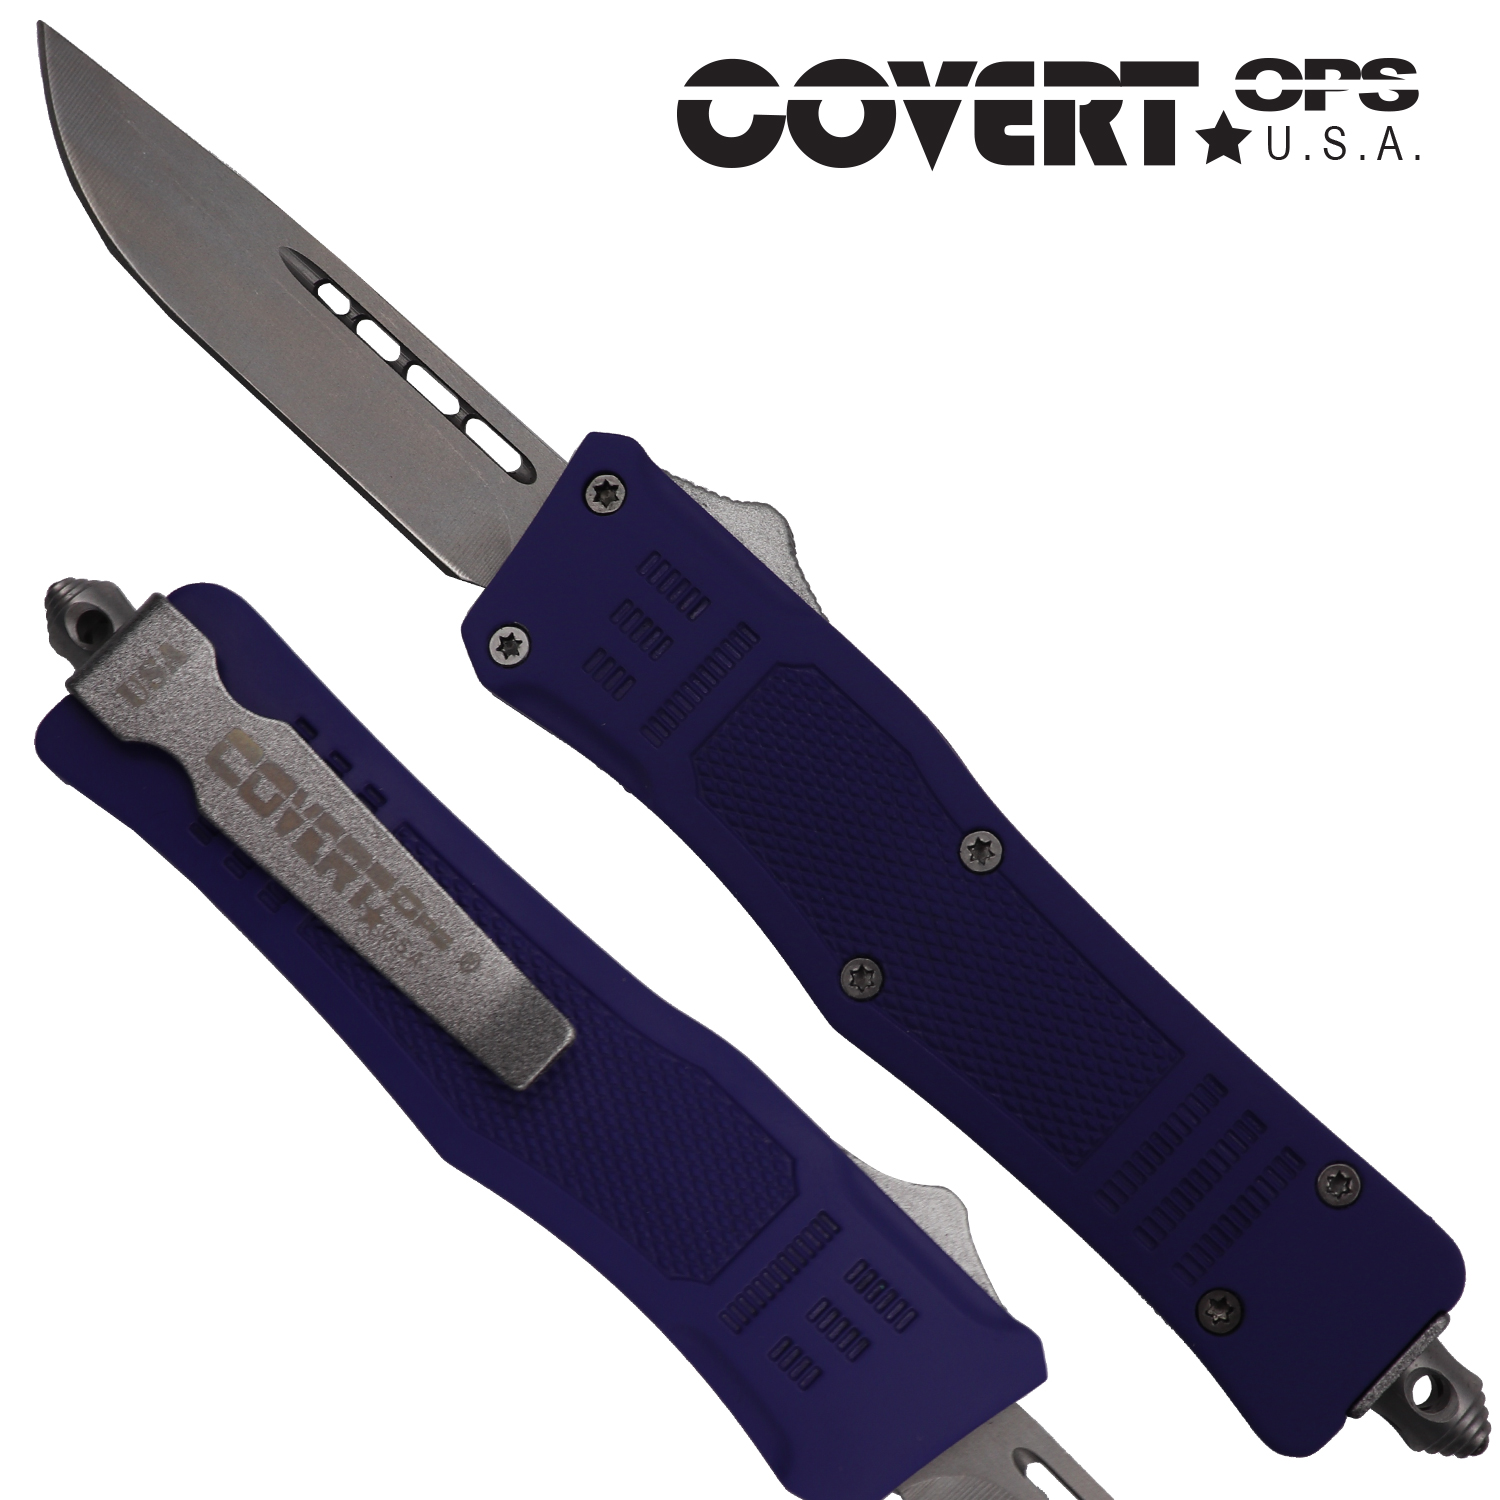 Covert OPS USA OTF Automatic Knife 7 inch overall Purple Handle Silver Drop Point D2 Steel Blade